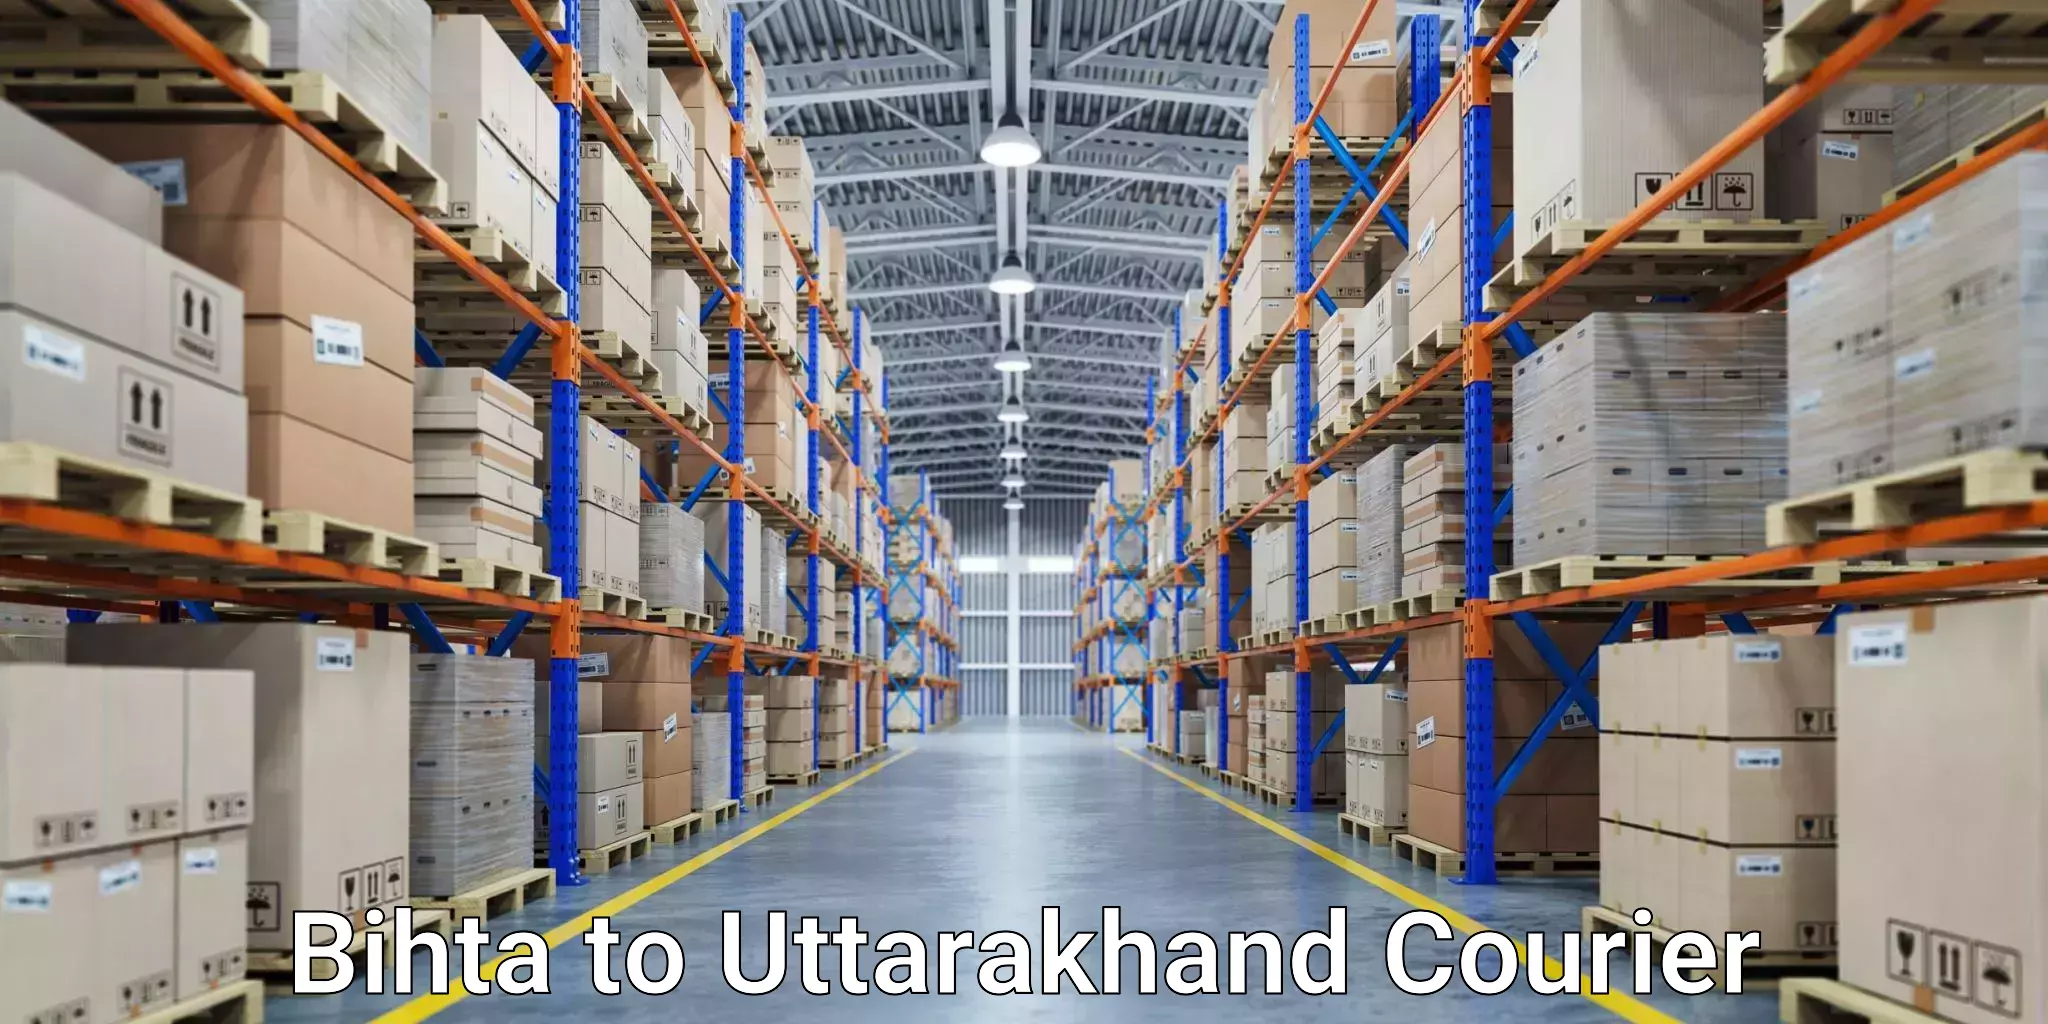 Customizable delivery plans in Bihta to Uttarakhand